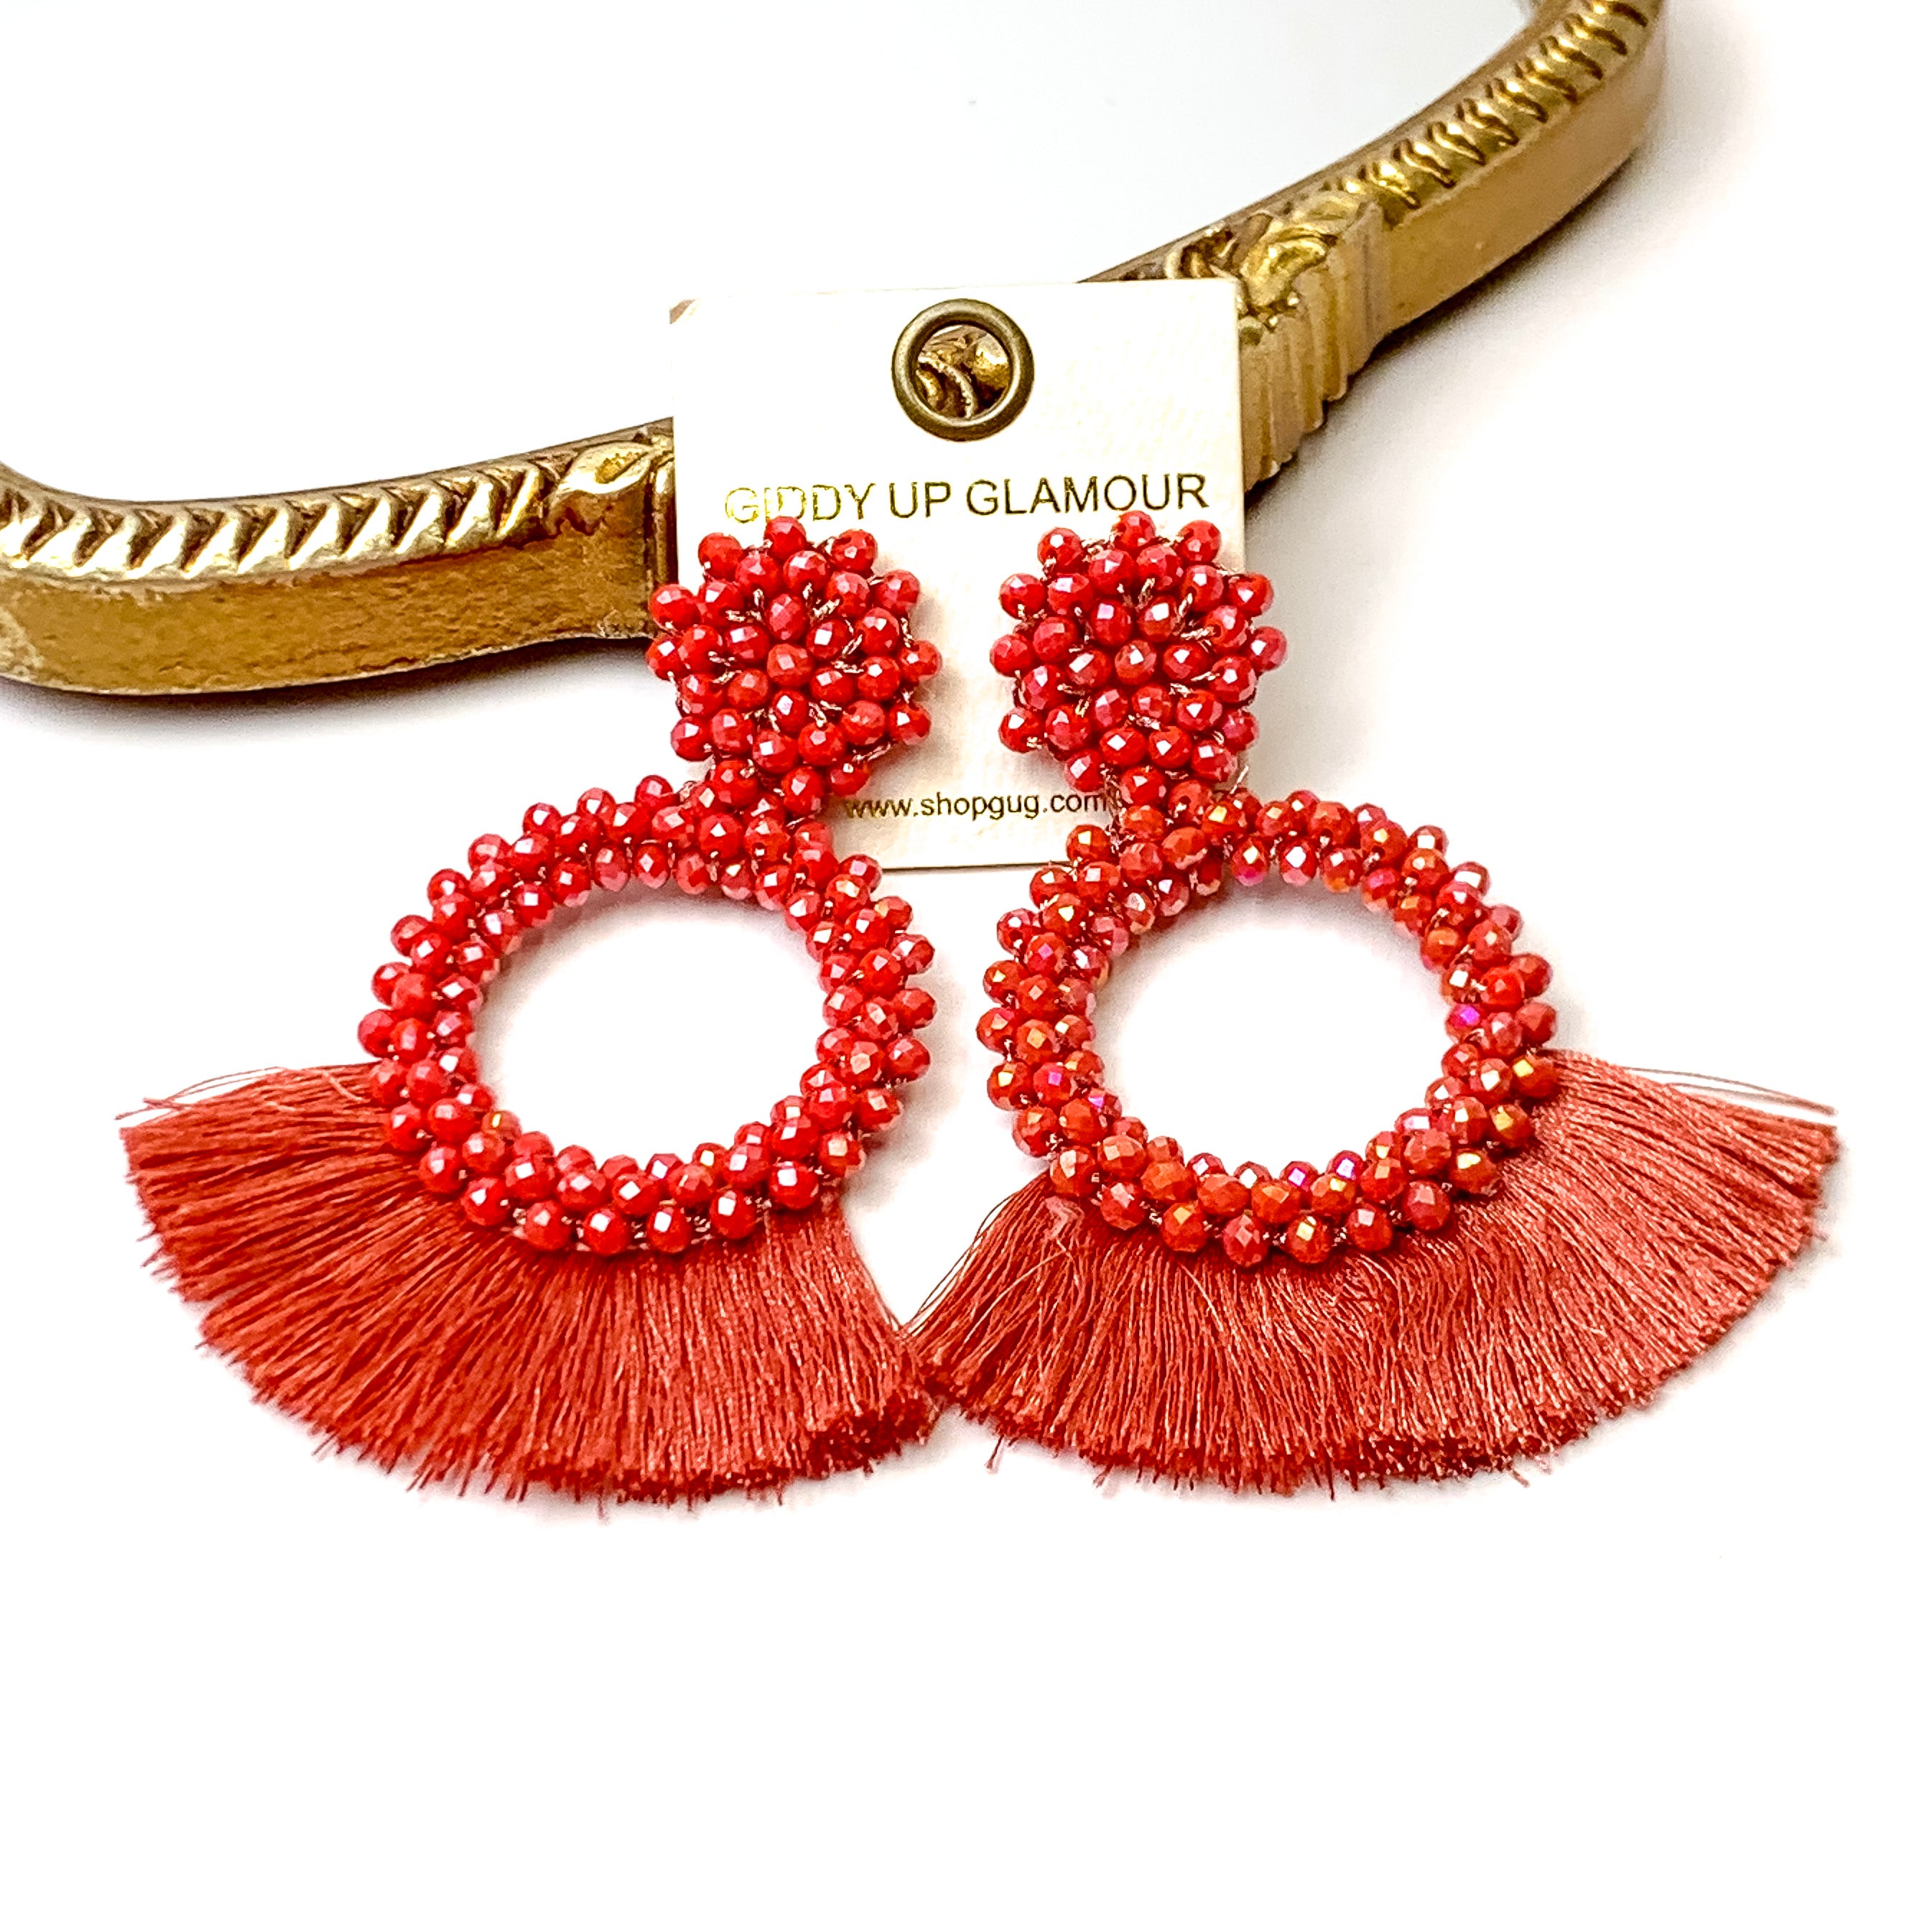 Seed Bead Circle Hoops with Fan Fringe Trim in Dusty Red - Giddy Up Glamour Boutique